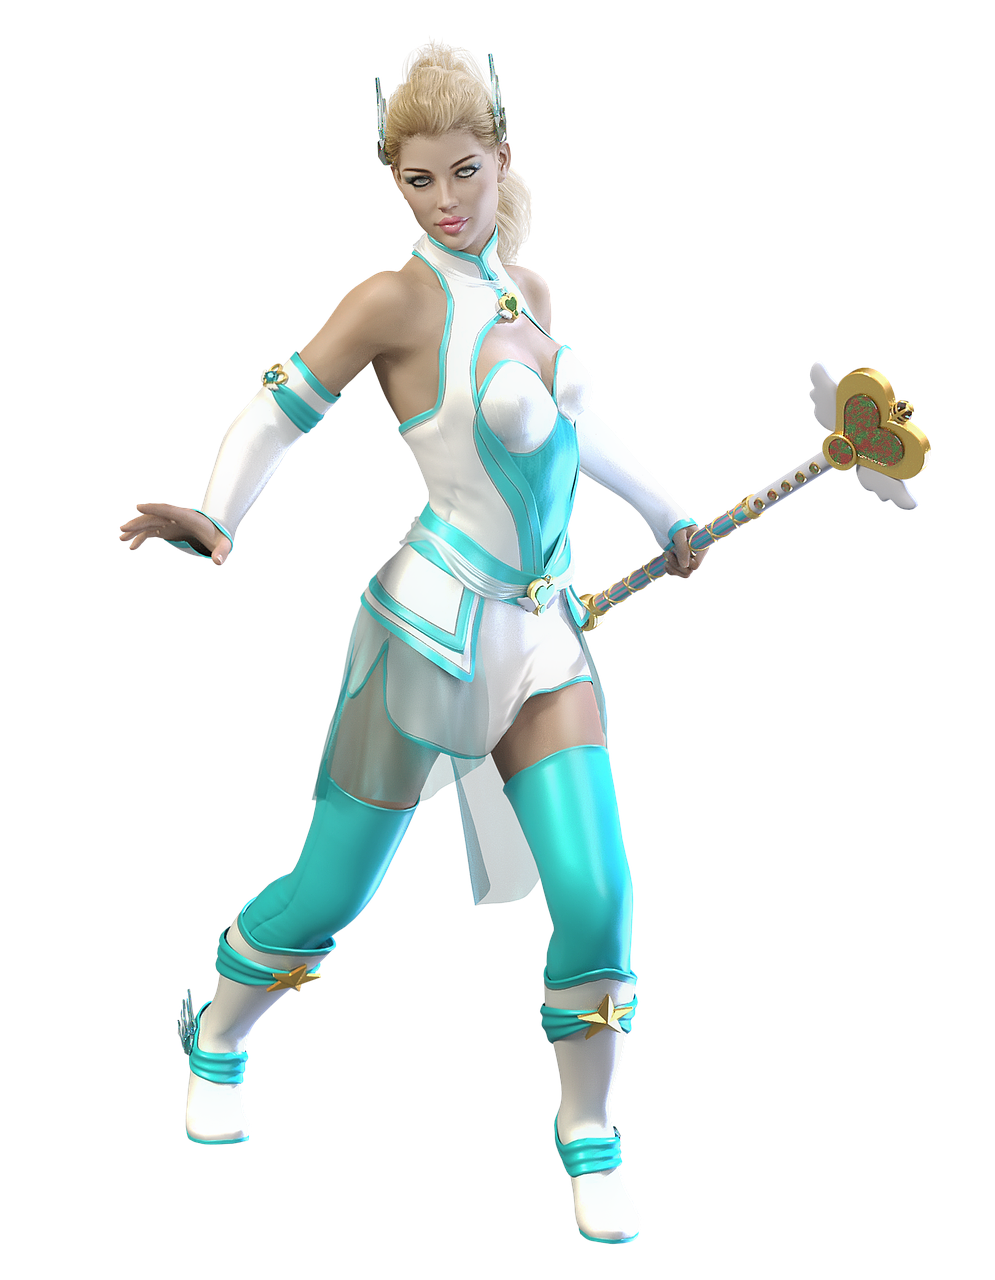 a woman in a blue and white outfit holding a sword, trending on cg society, 3 d character concept, a blonde emerald warrior, heroic muay thai stance pose, holding a magic staff